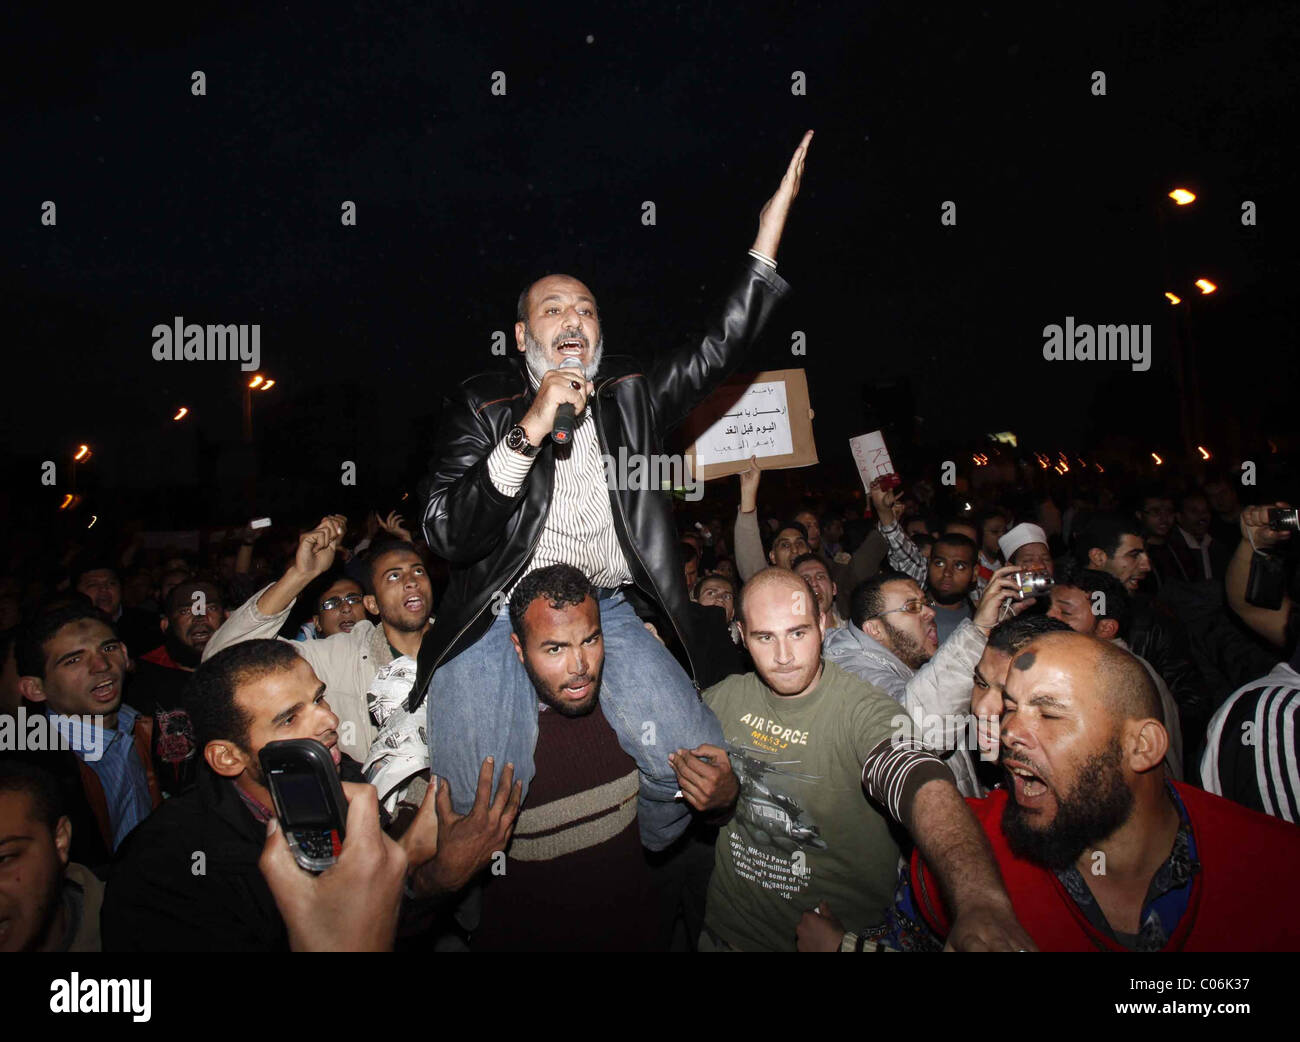 Civil unrest in Cairo, Egypt, 30th January 2011. Stock Photo